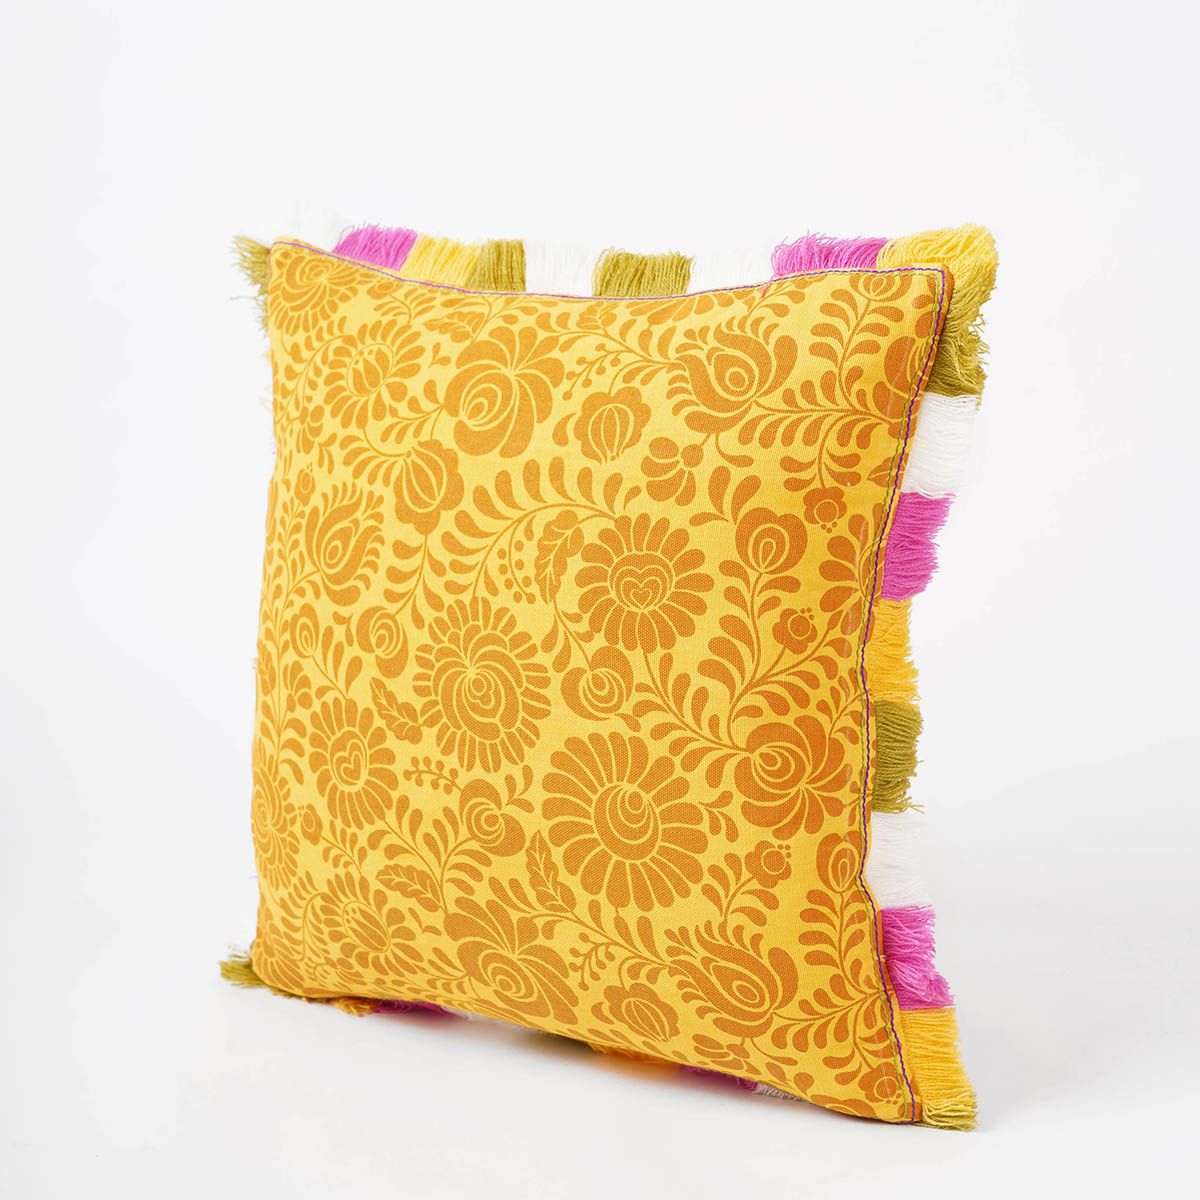 MATYO - Yellow printed cotton Pillow cover with multicolour acrylic fringe, sizes available